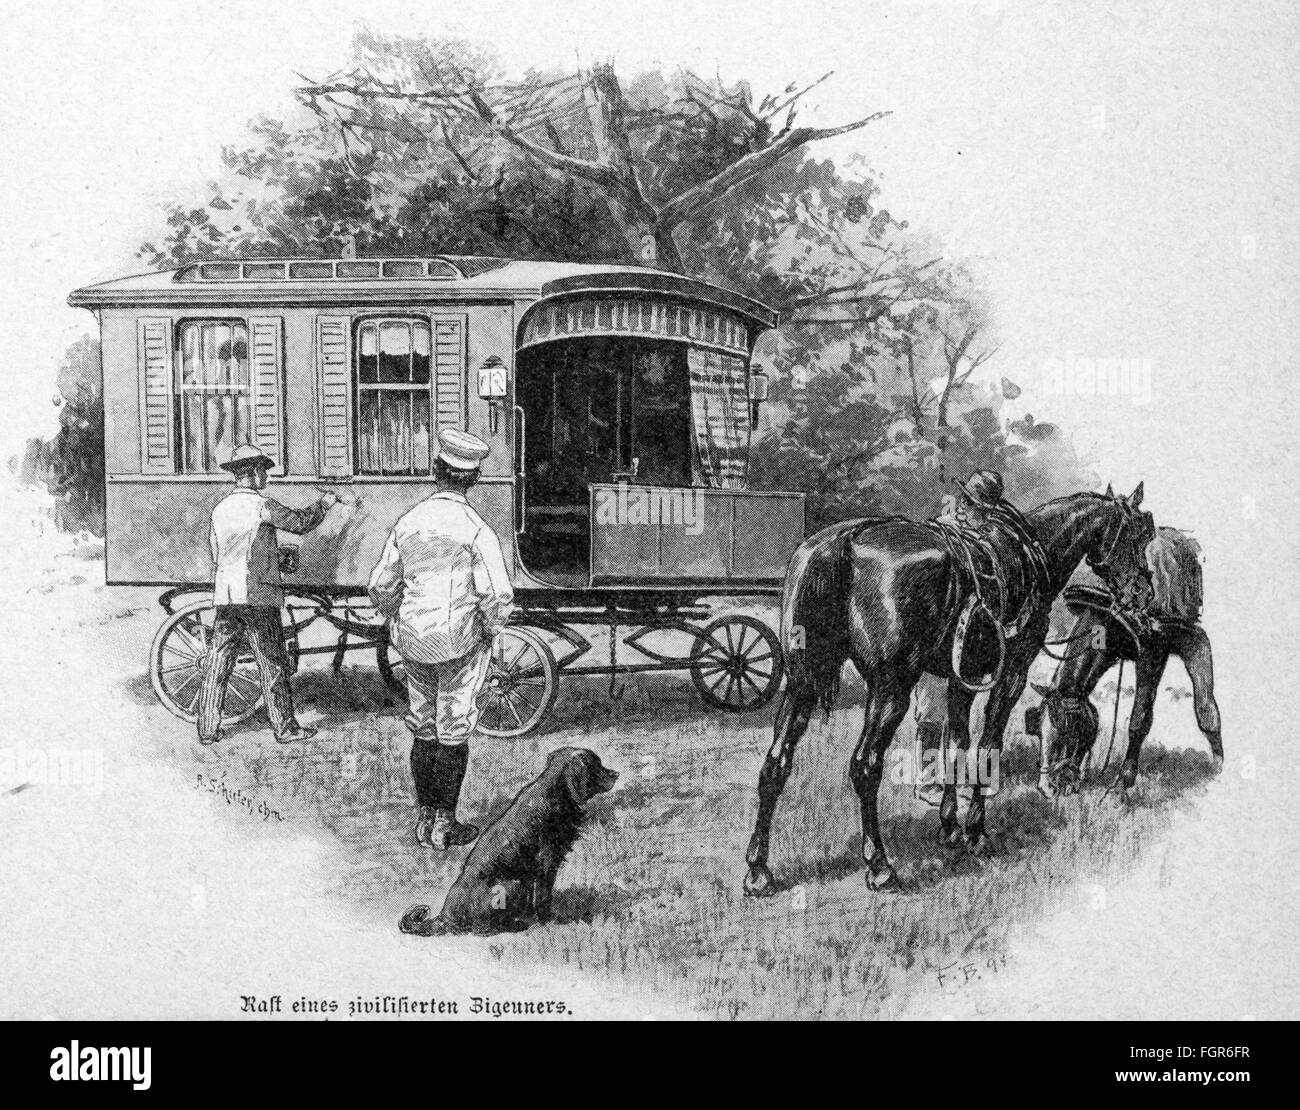 Year 1923  8x10 Photograph of a Delivery Horse & Wagon in Washington D.C 